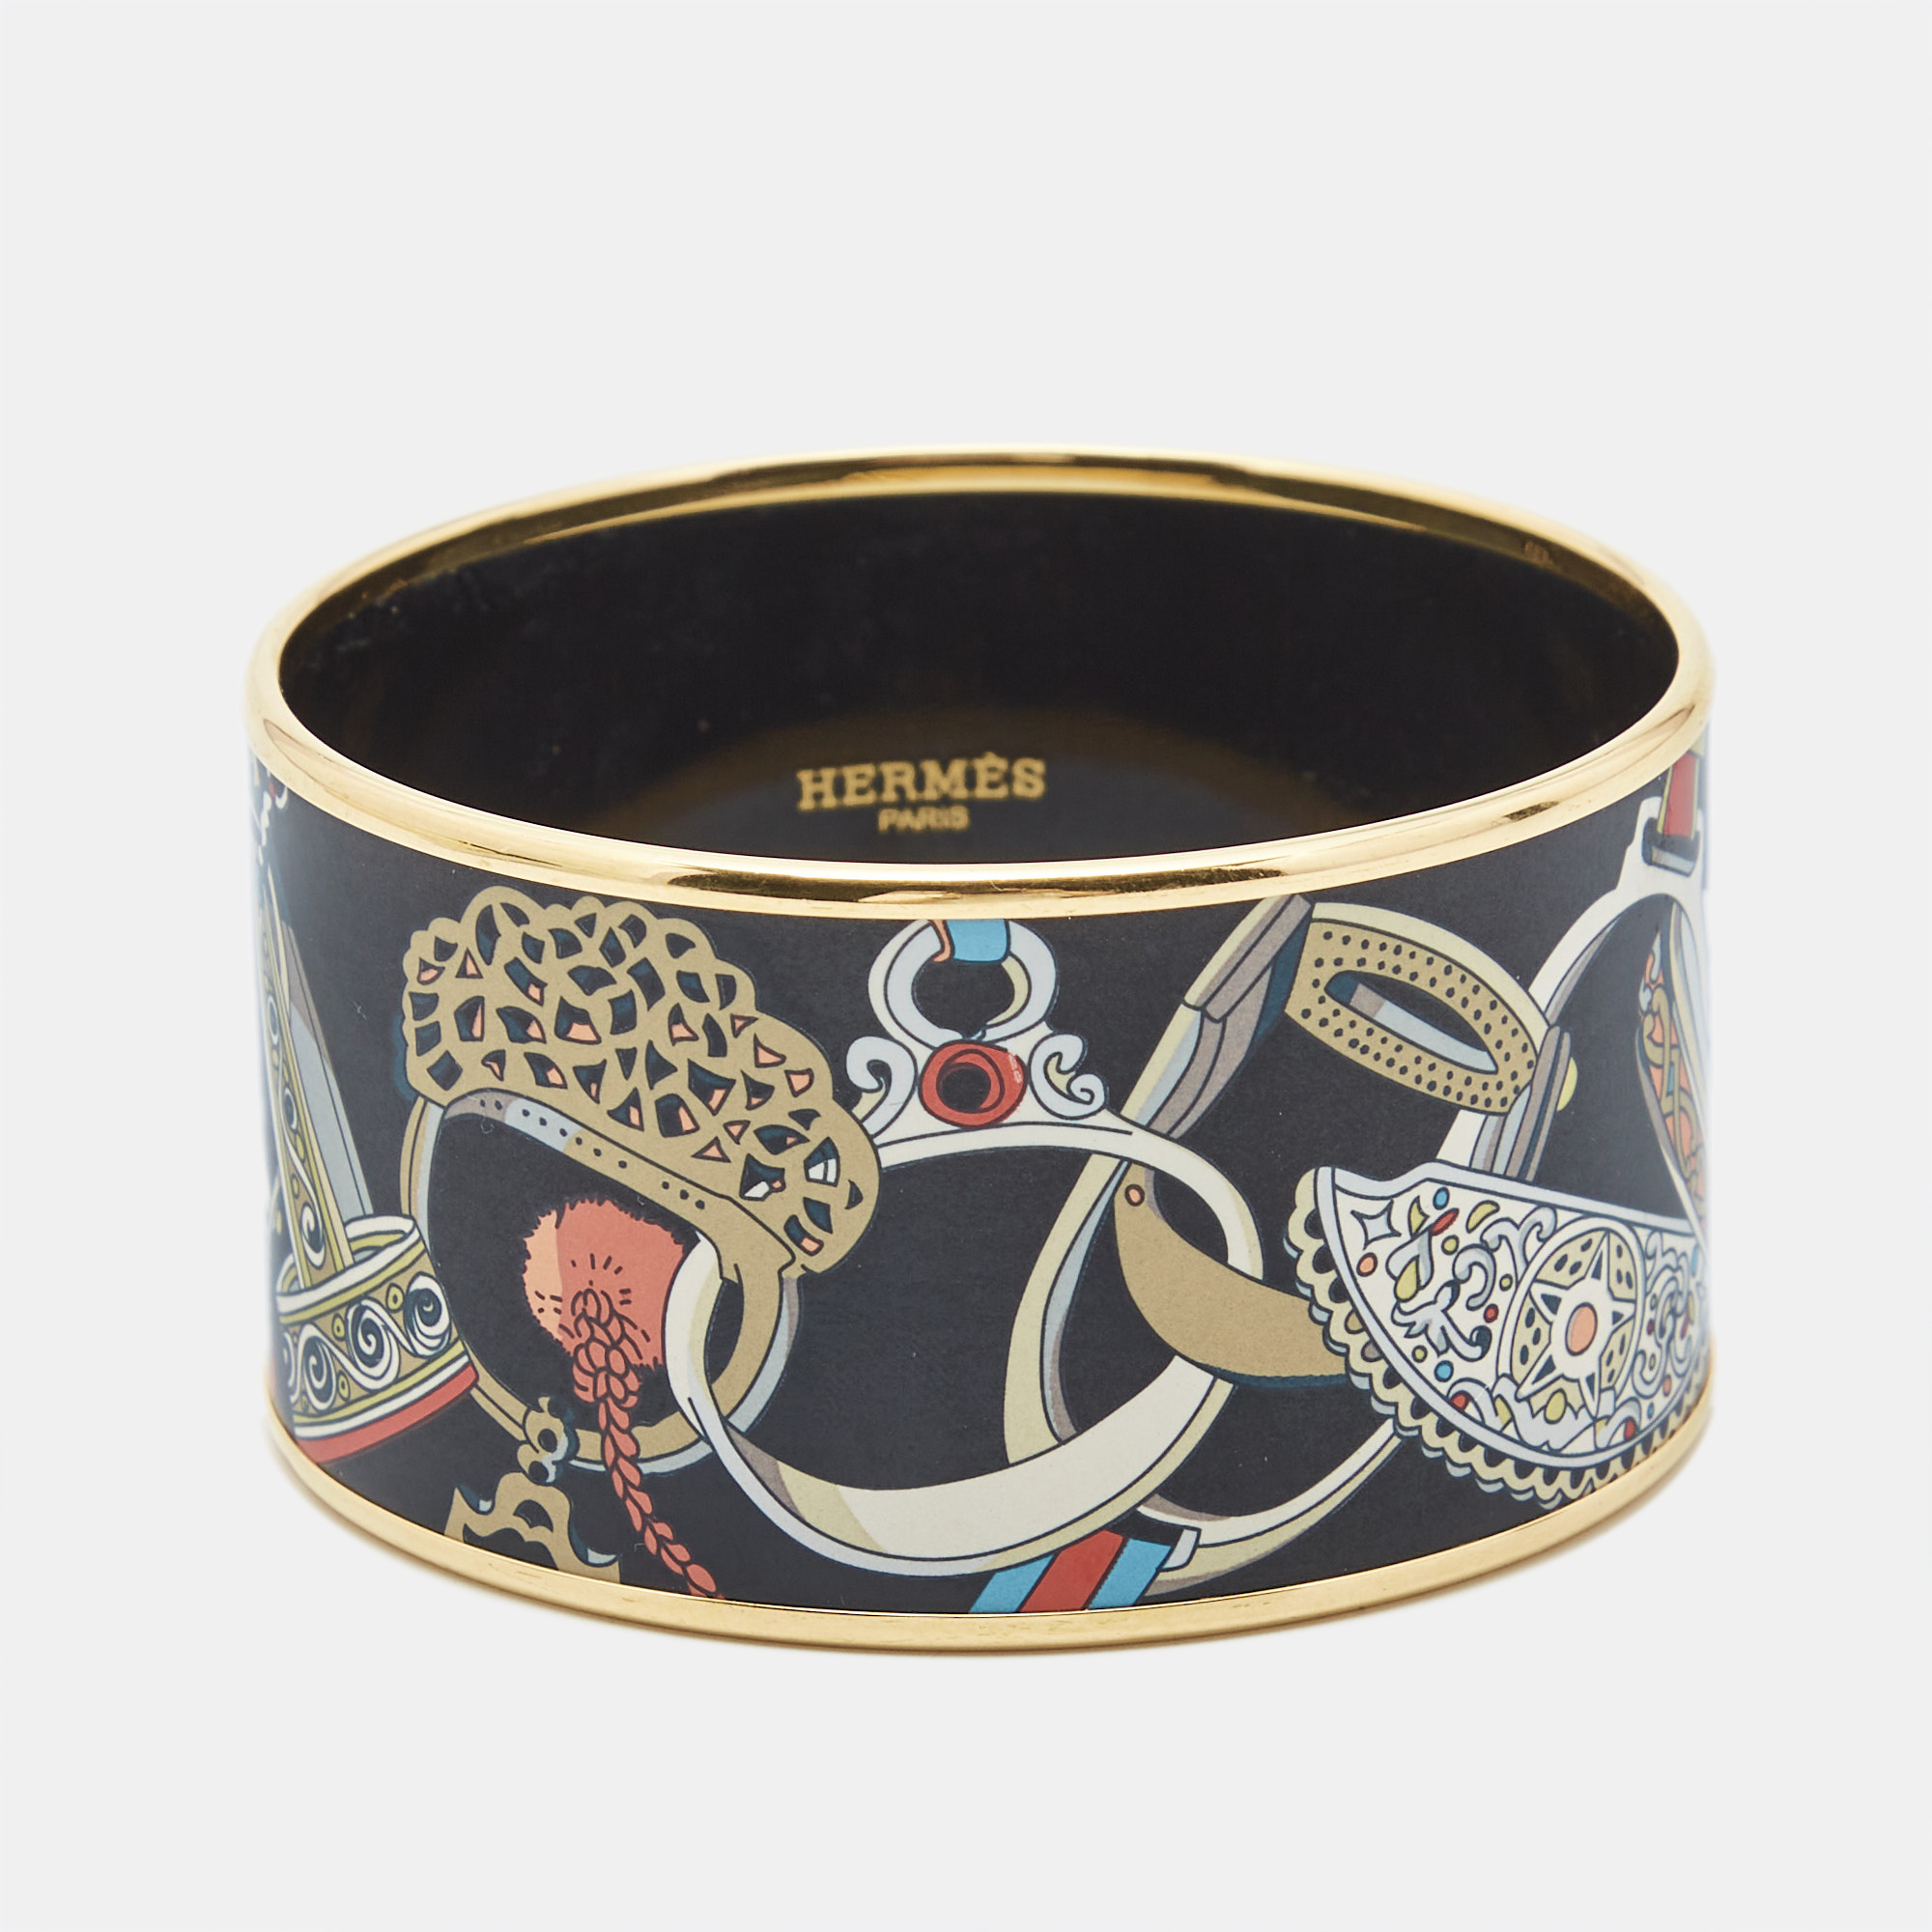 Hermes  concours d'etriers printed enamel gold plated extra wide bracelet